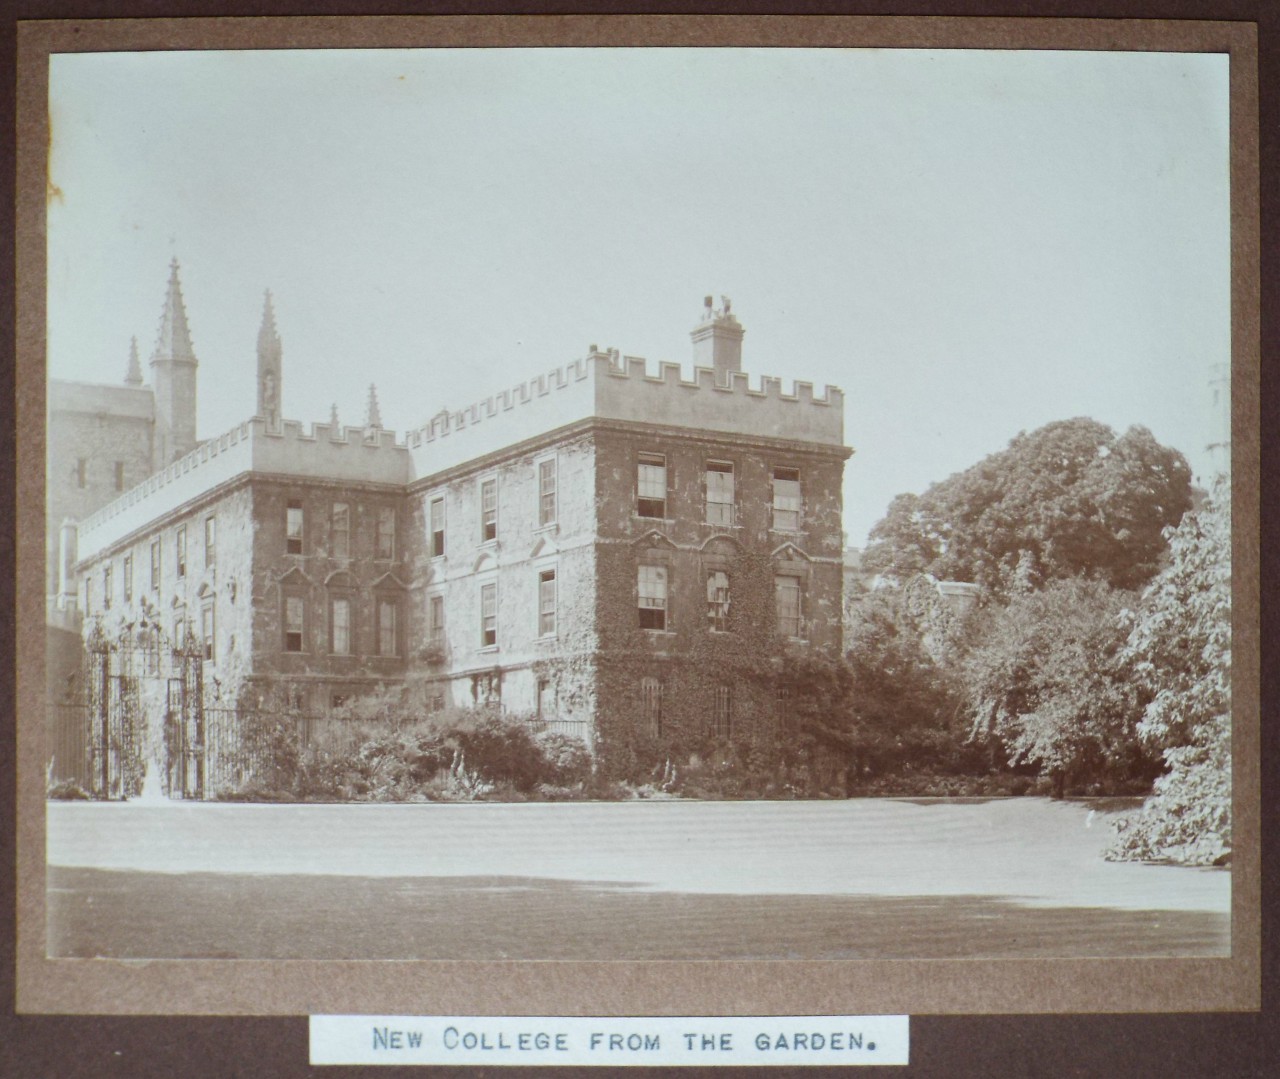 Photograph - New College from the Garden.